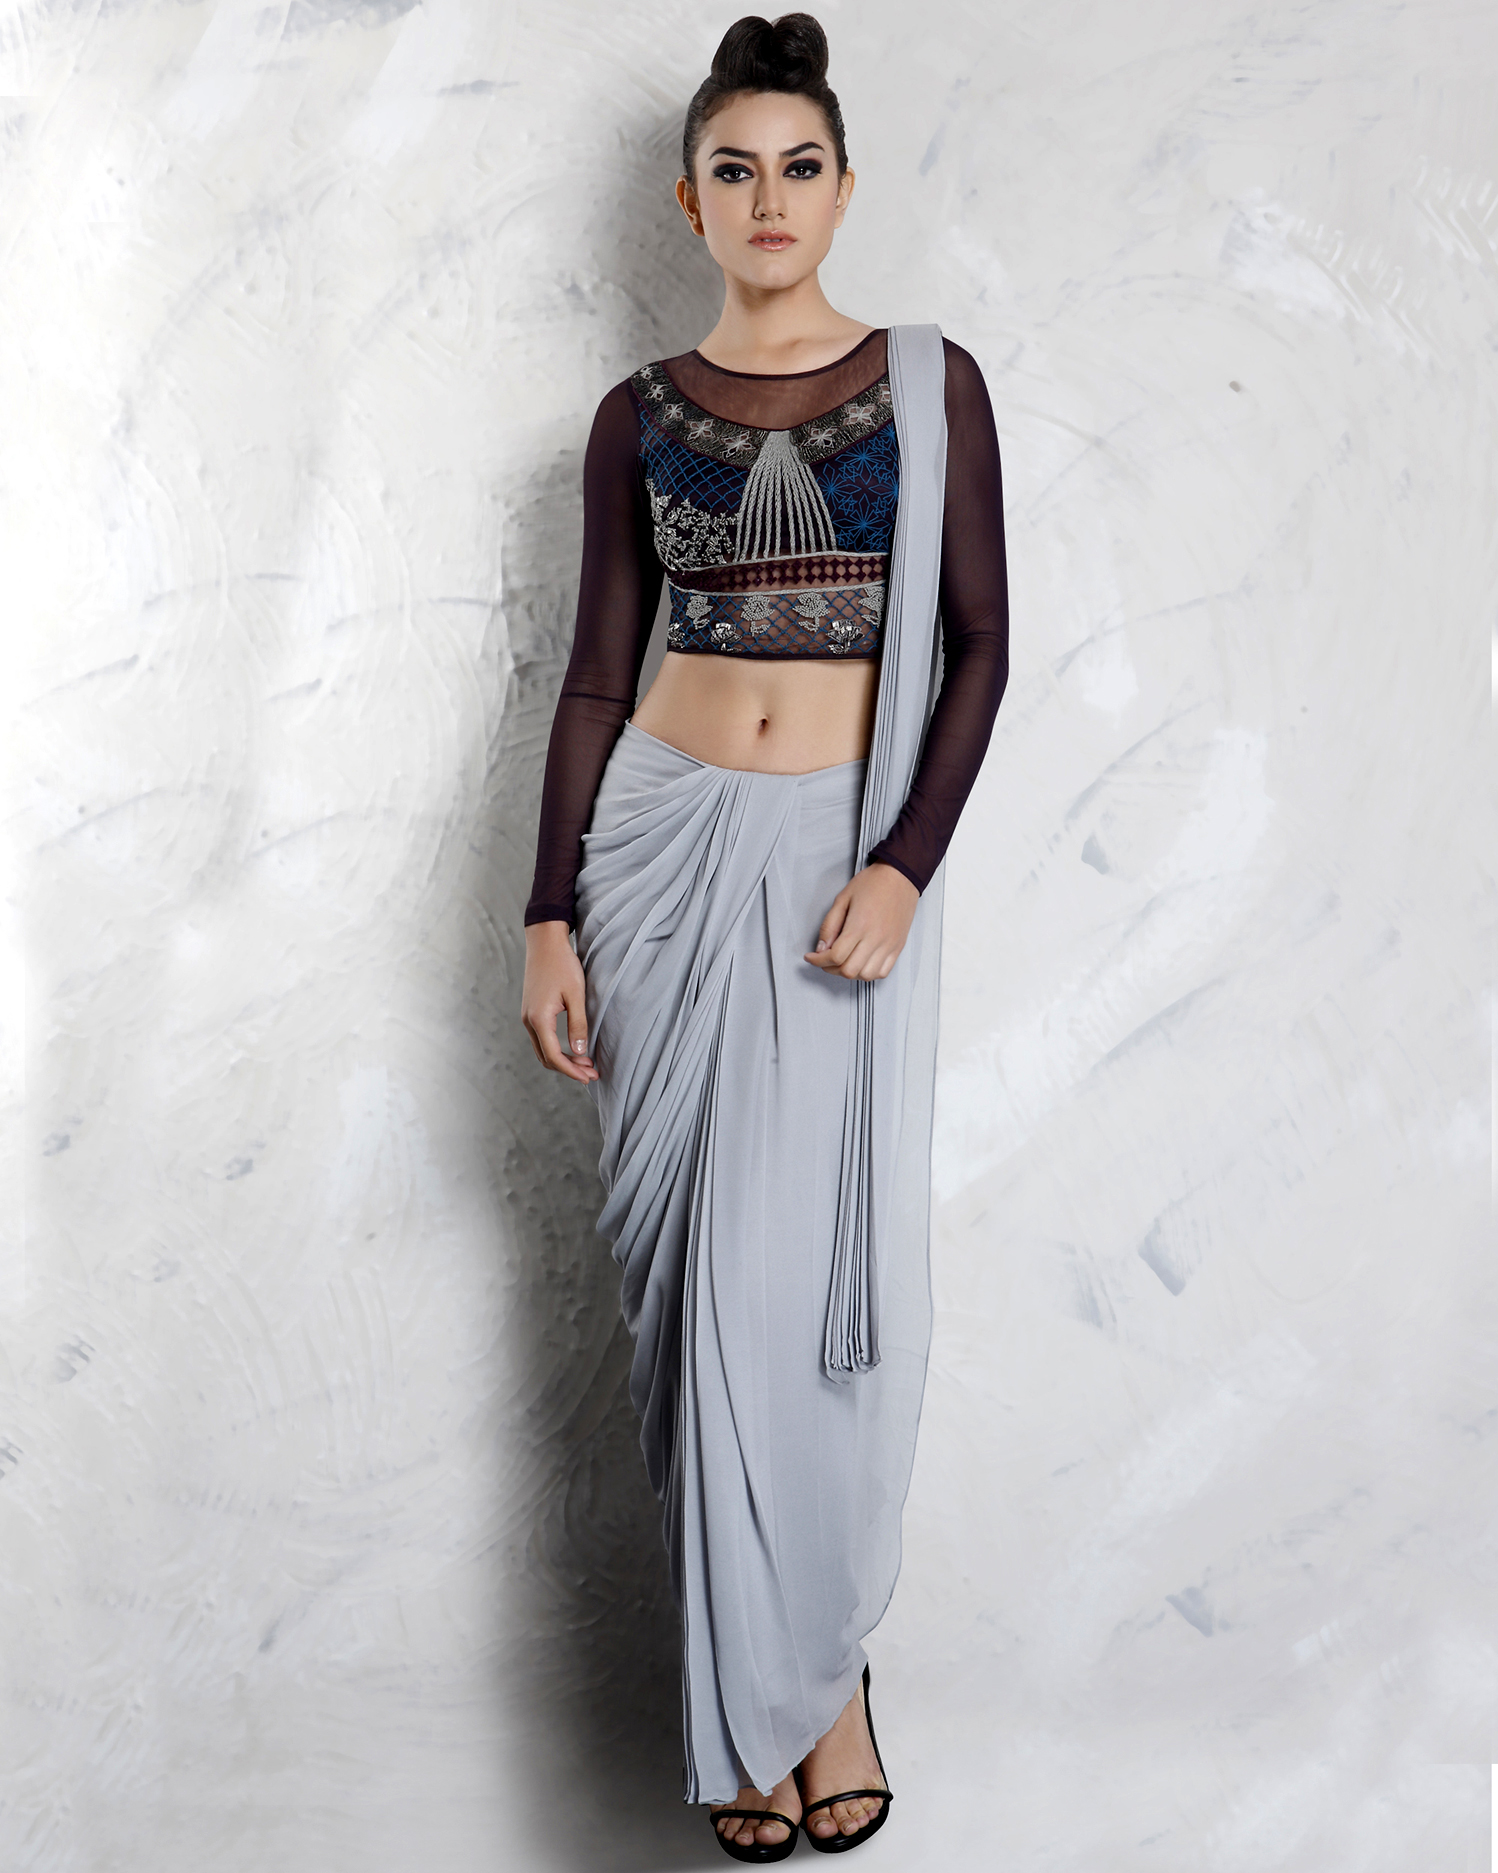 Crop tops give a stylish look to the saree, you can also try